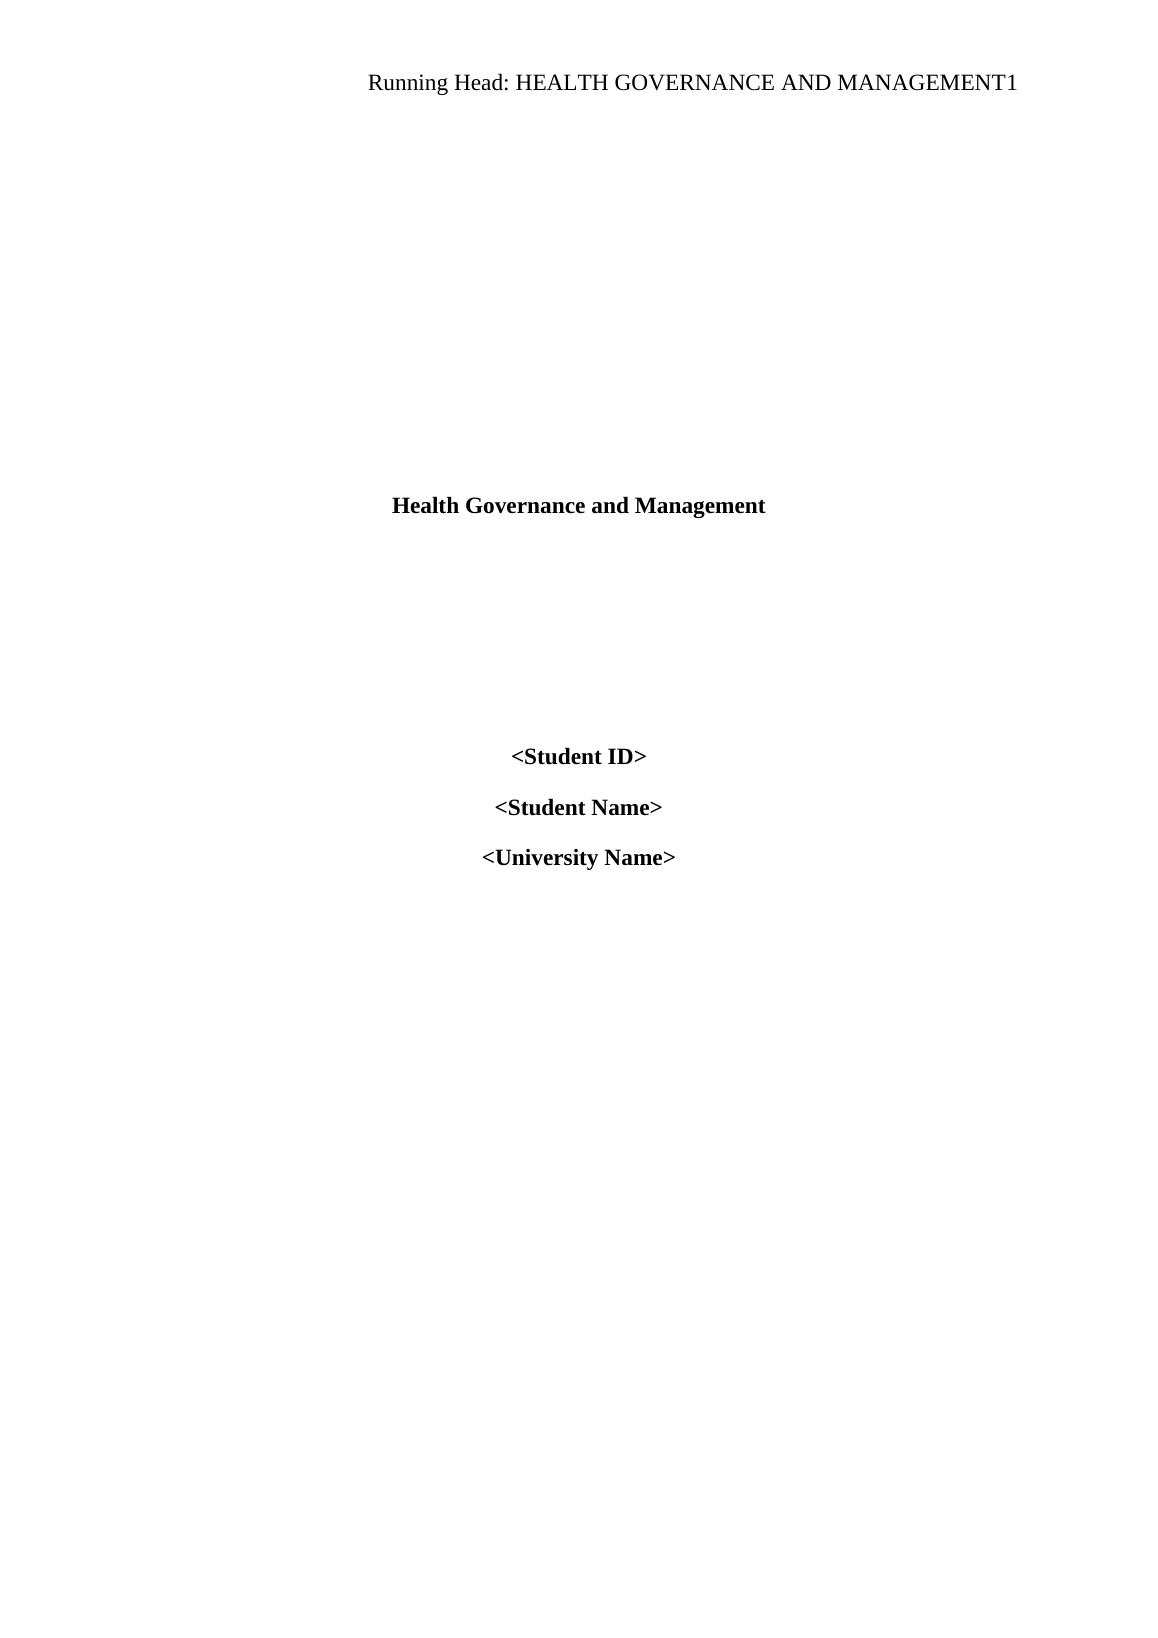 Health Governance and Management Assignment_1